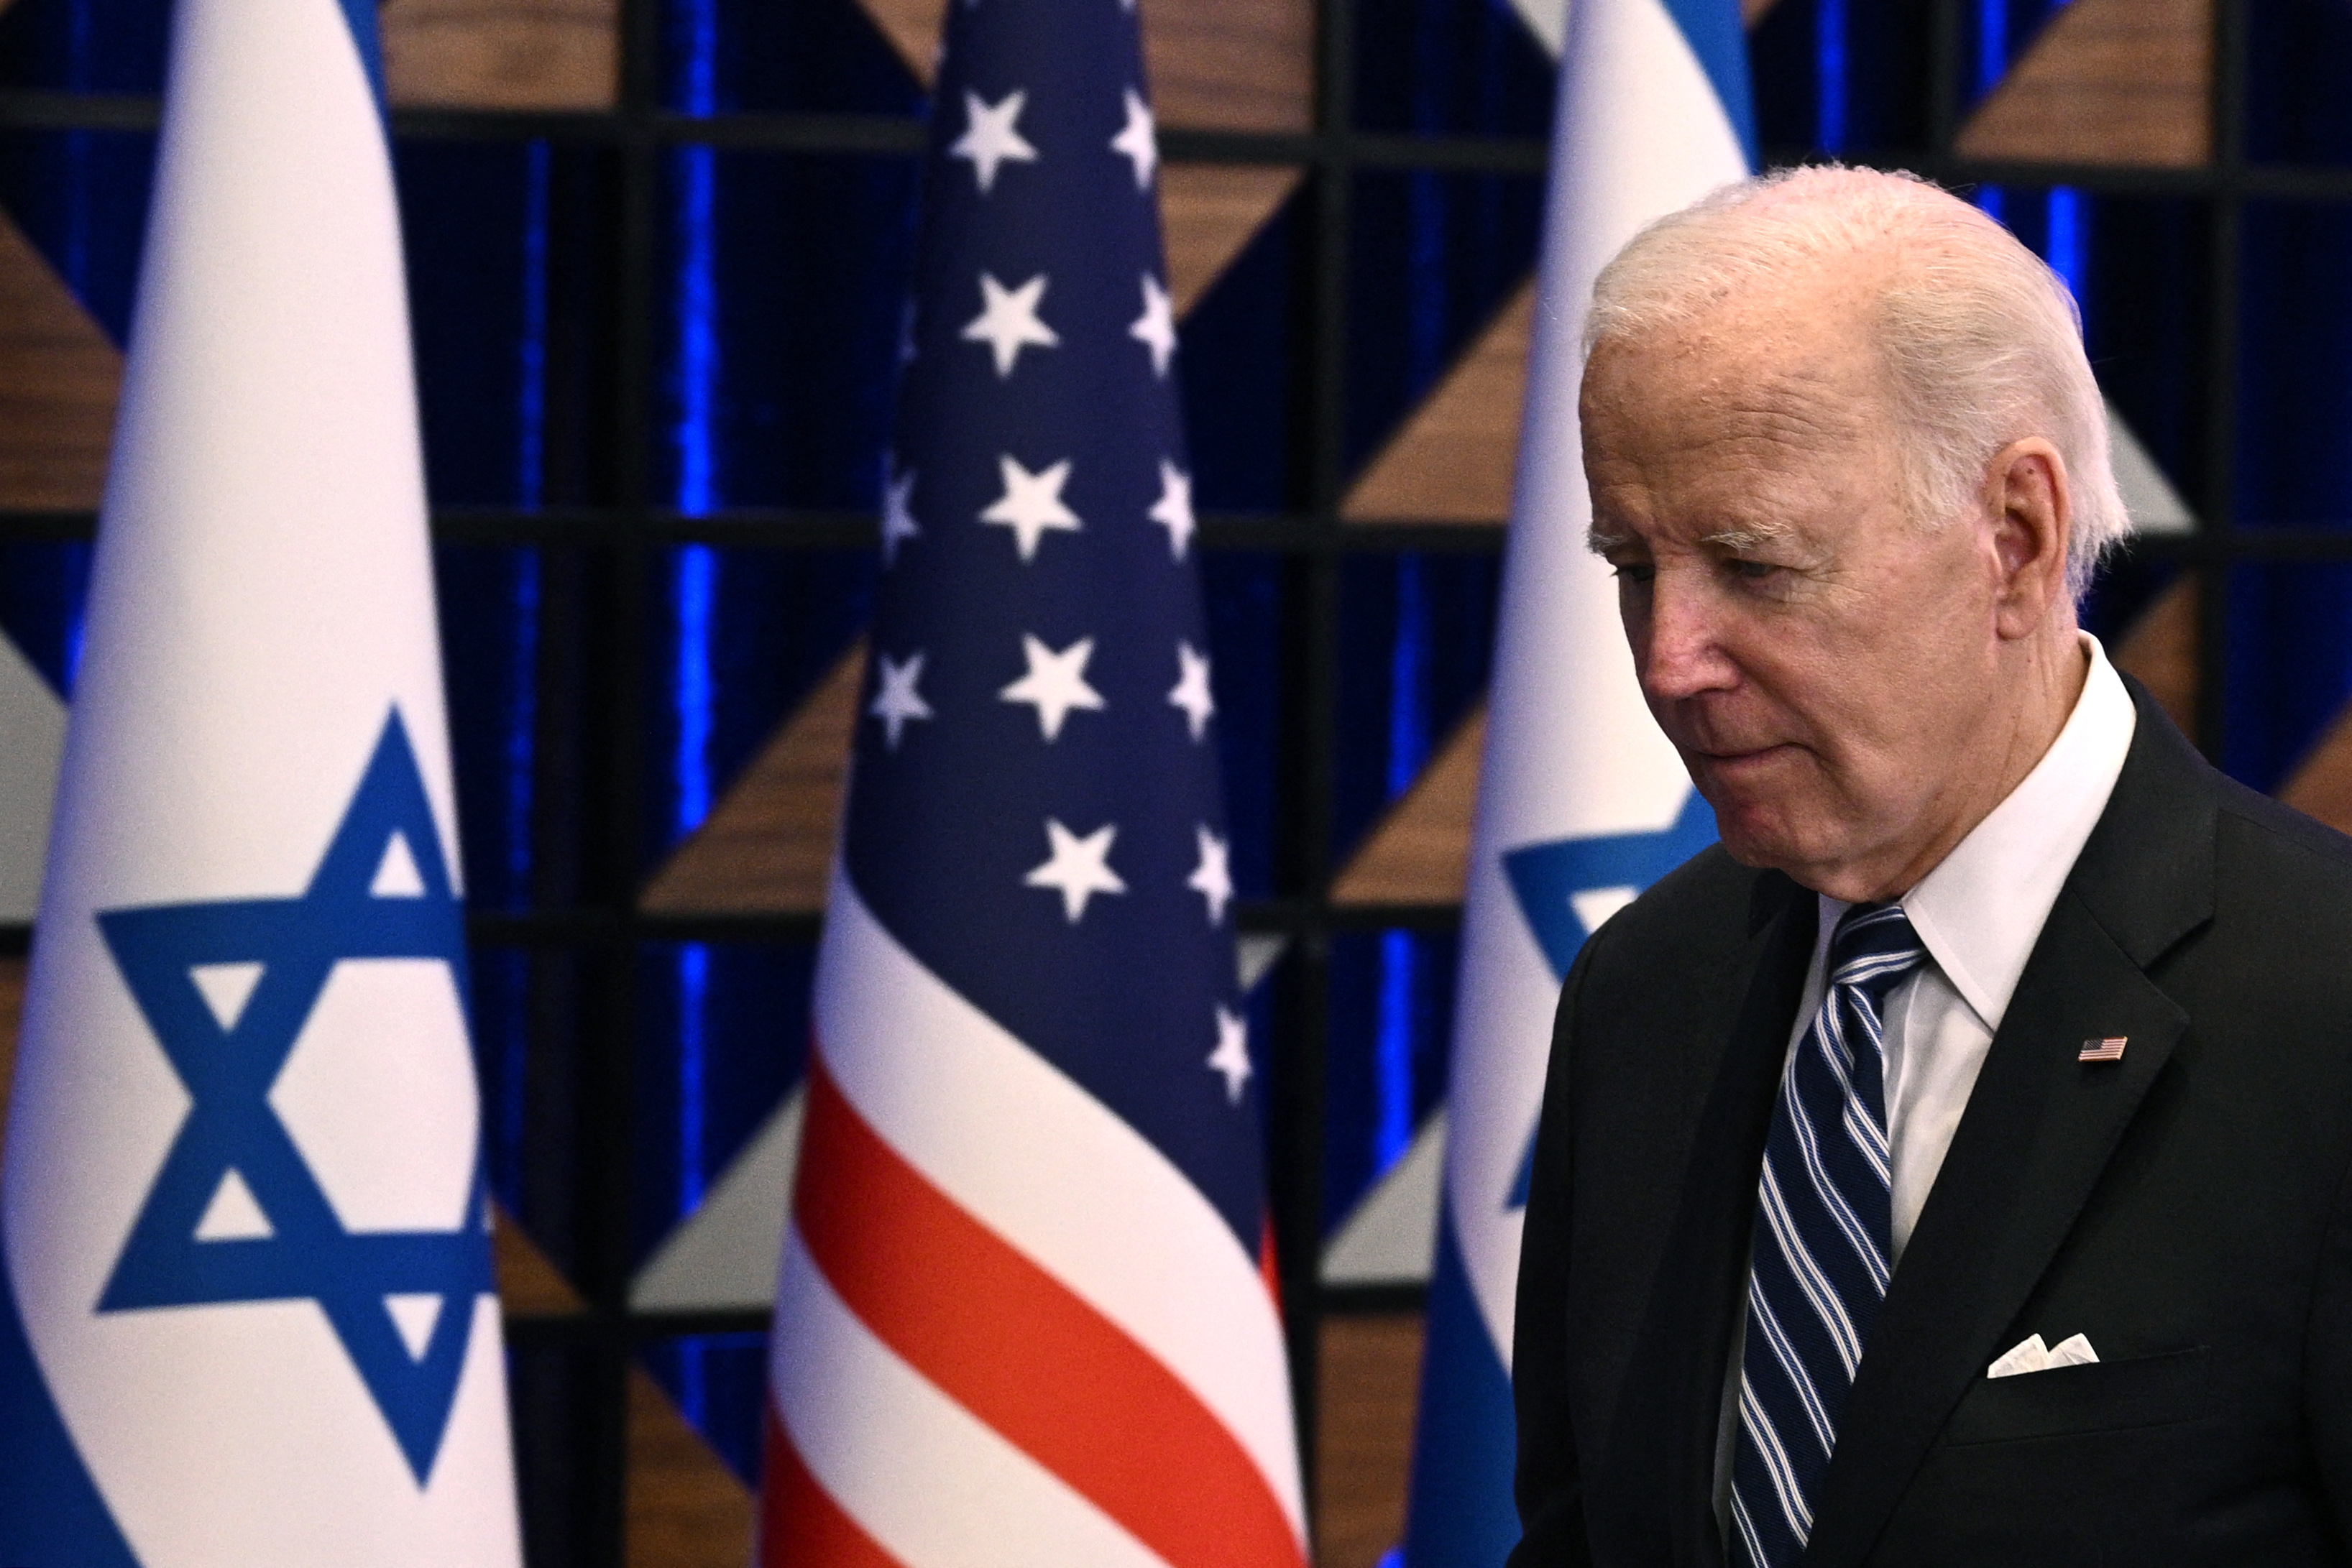 President Biden, in a dark suit and striped tie, looking slightly downward as he walks past the US and Israel flags on standing poles in a conference room.